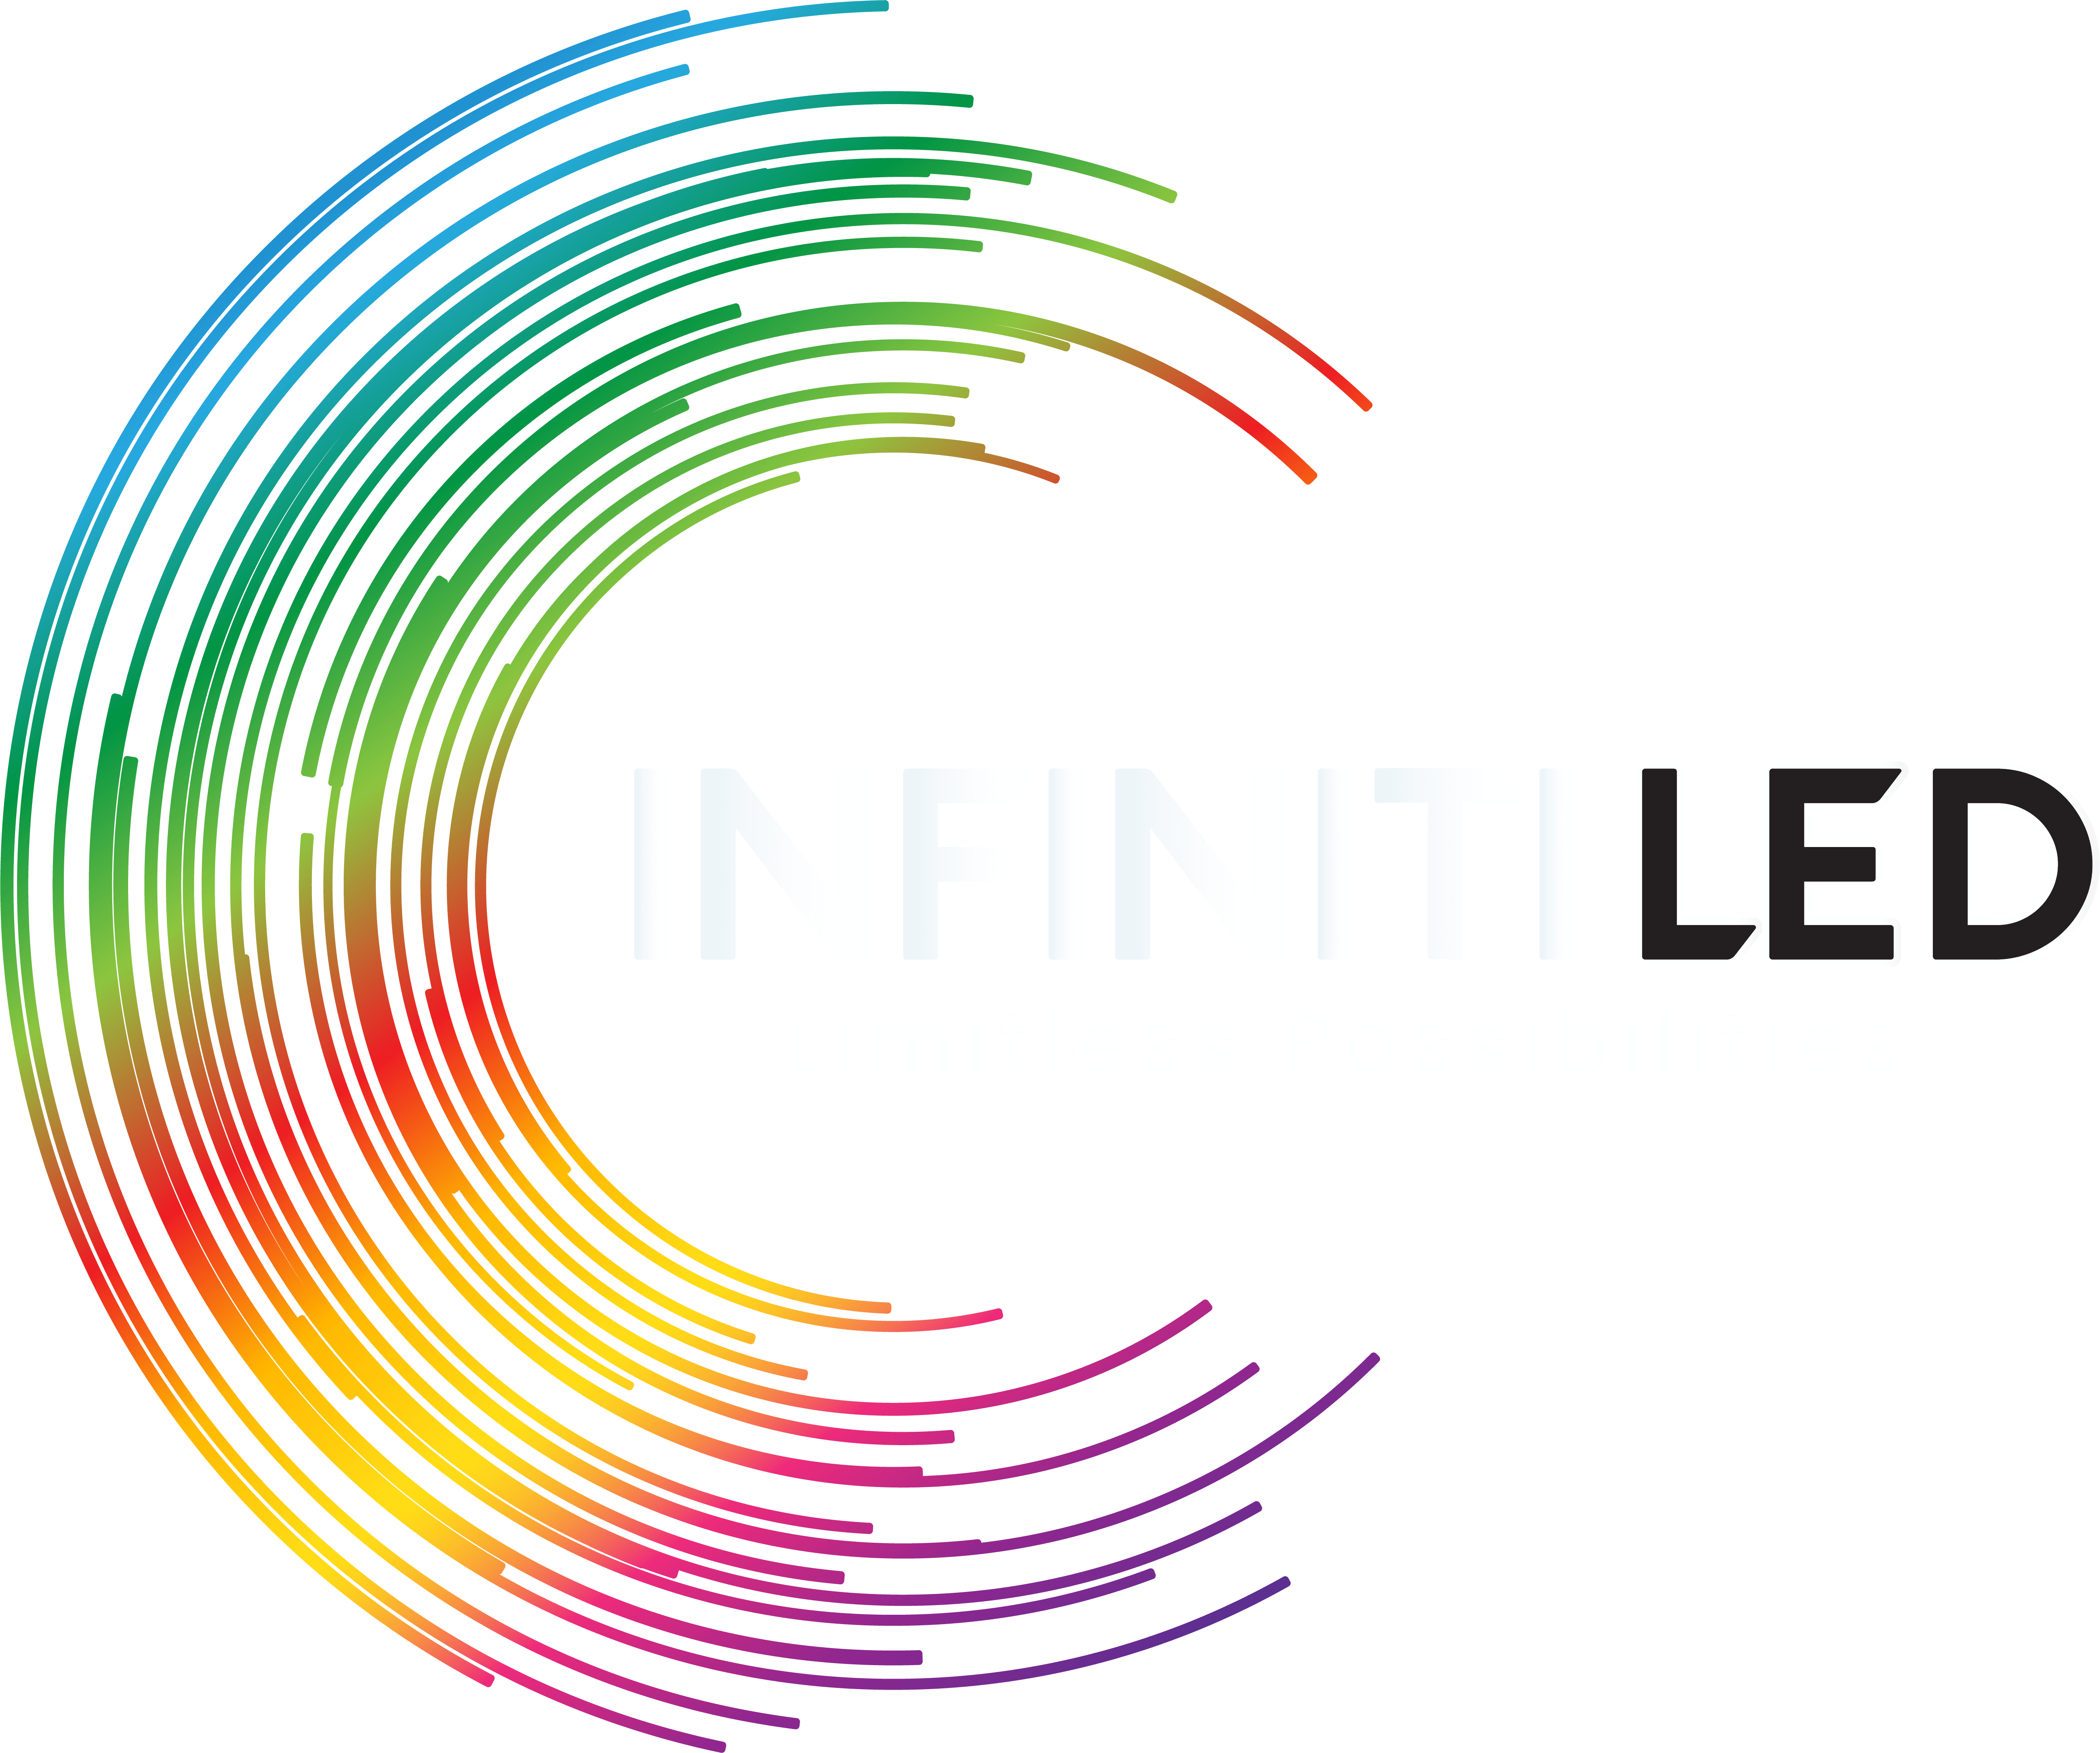 INFINITILED - Limitless Possibilities 